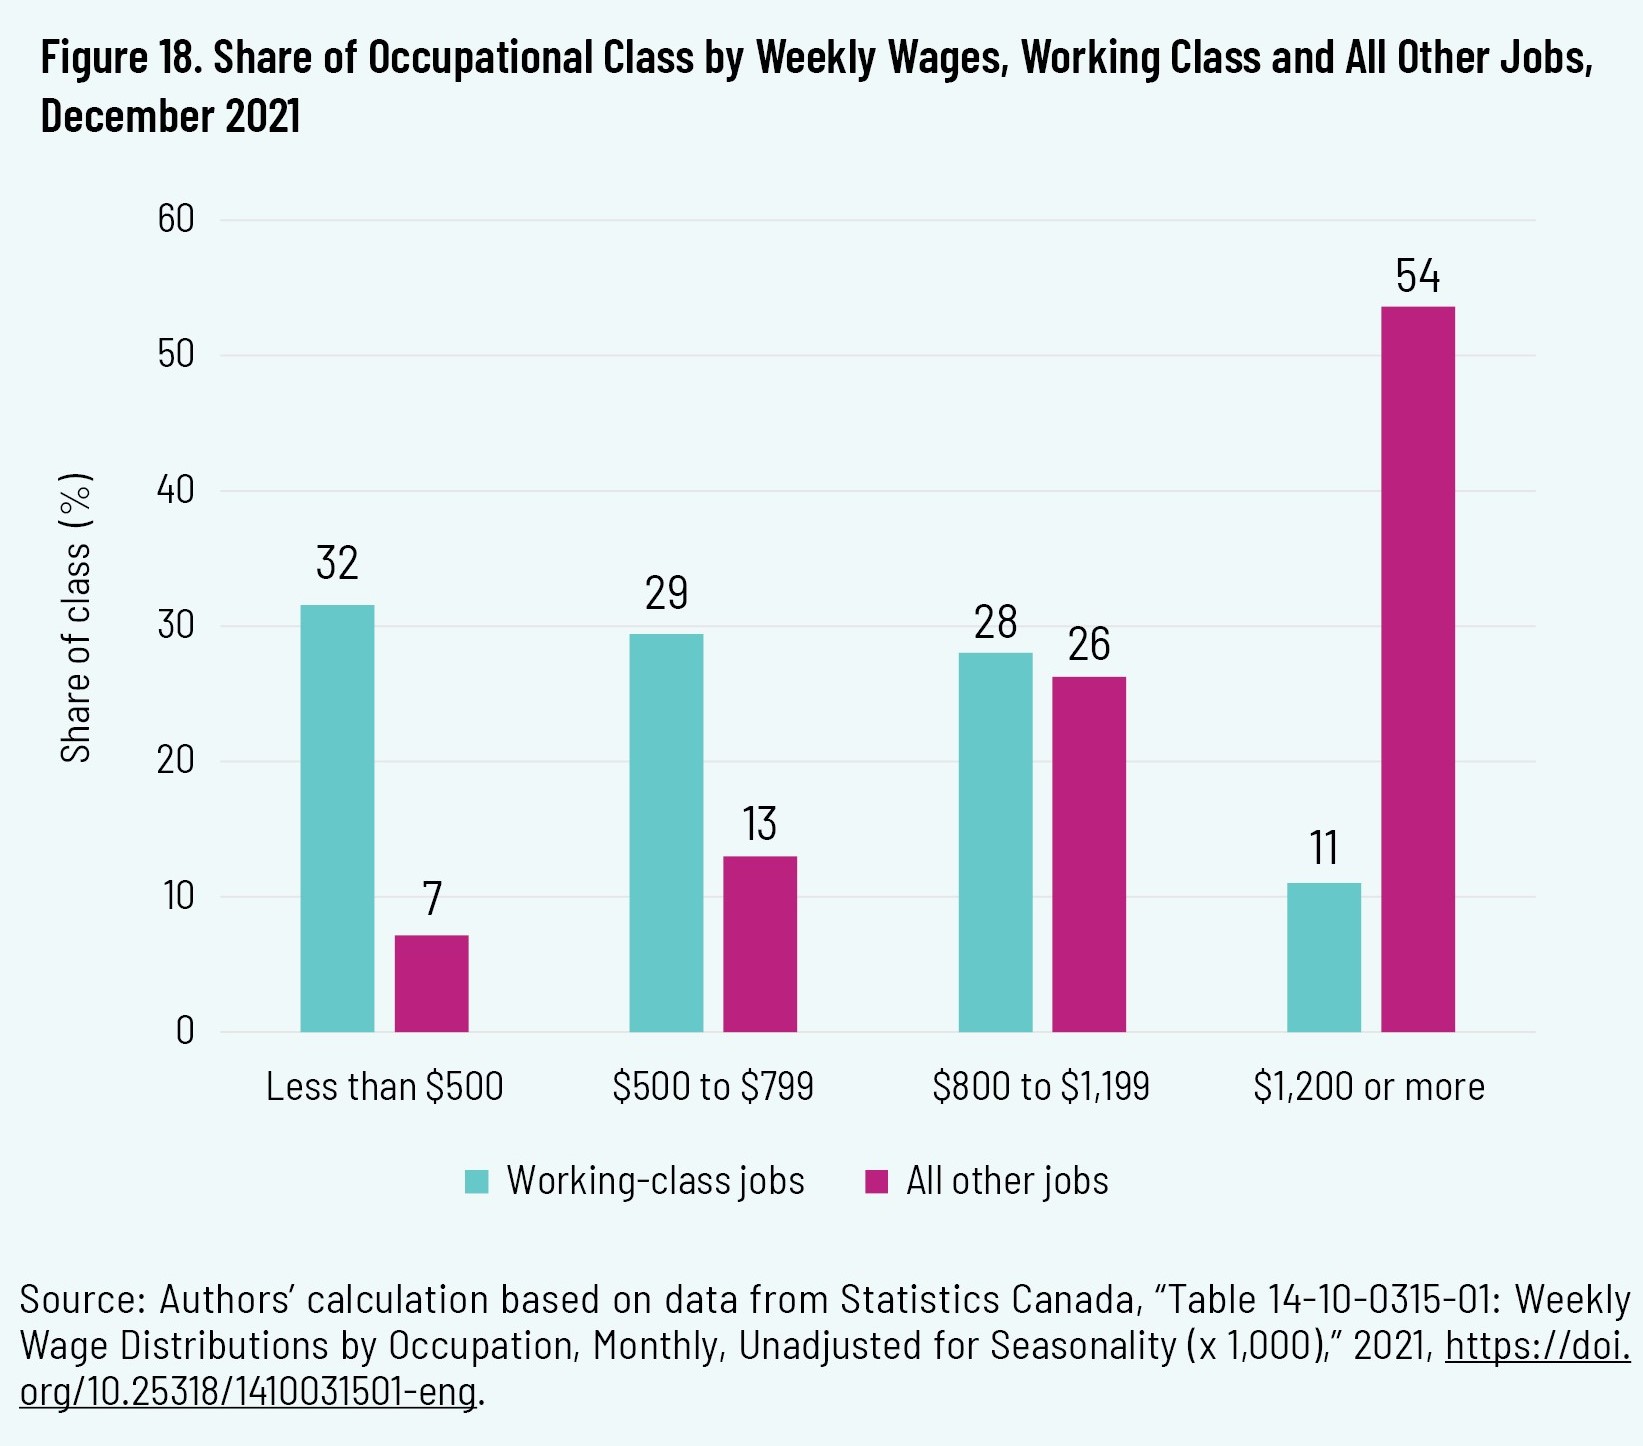 Figure 18. Share of Occupational Class by Weekly Wages, Working Class and All Other Jobs, December 2021